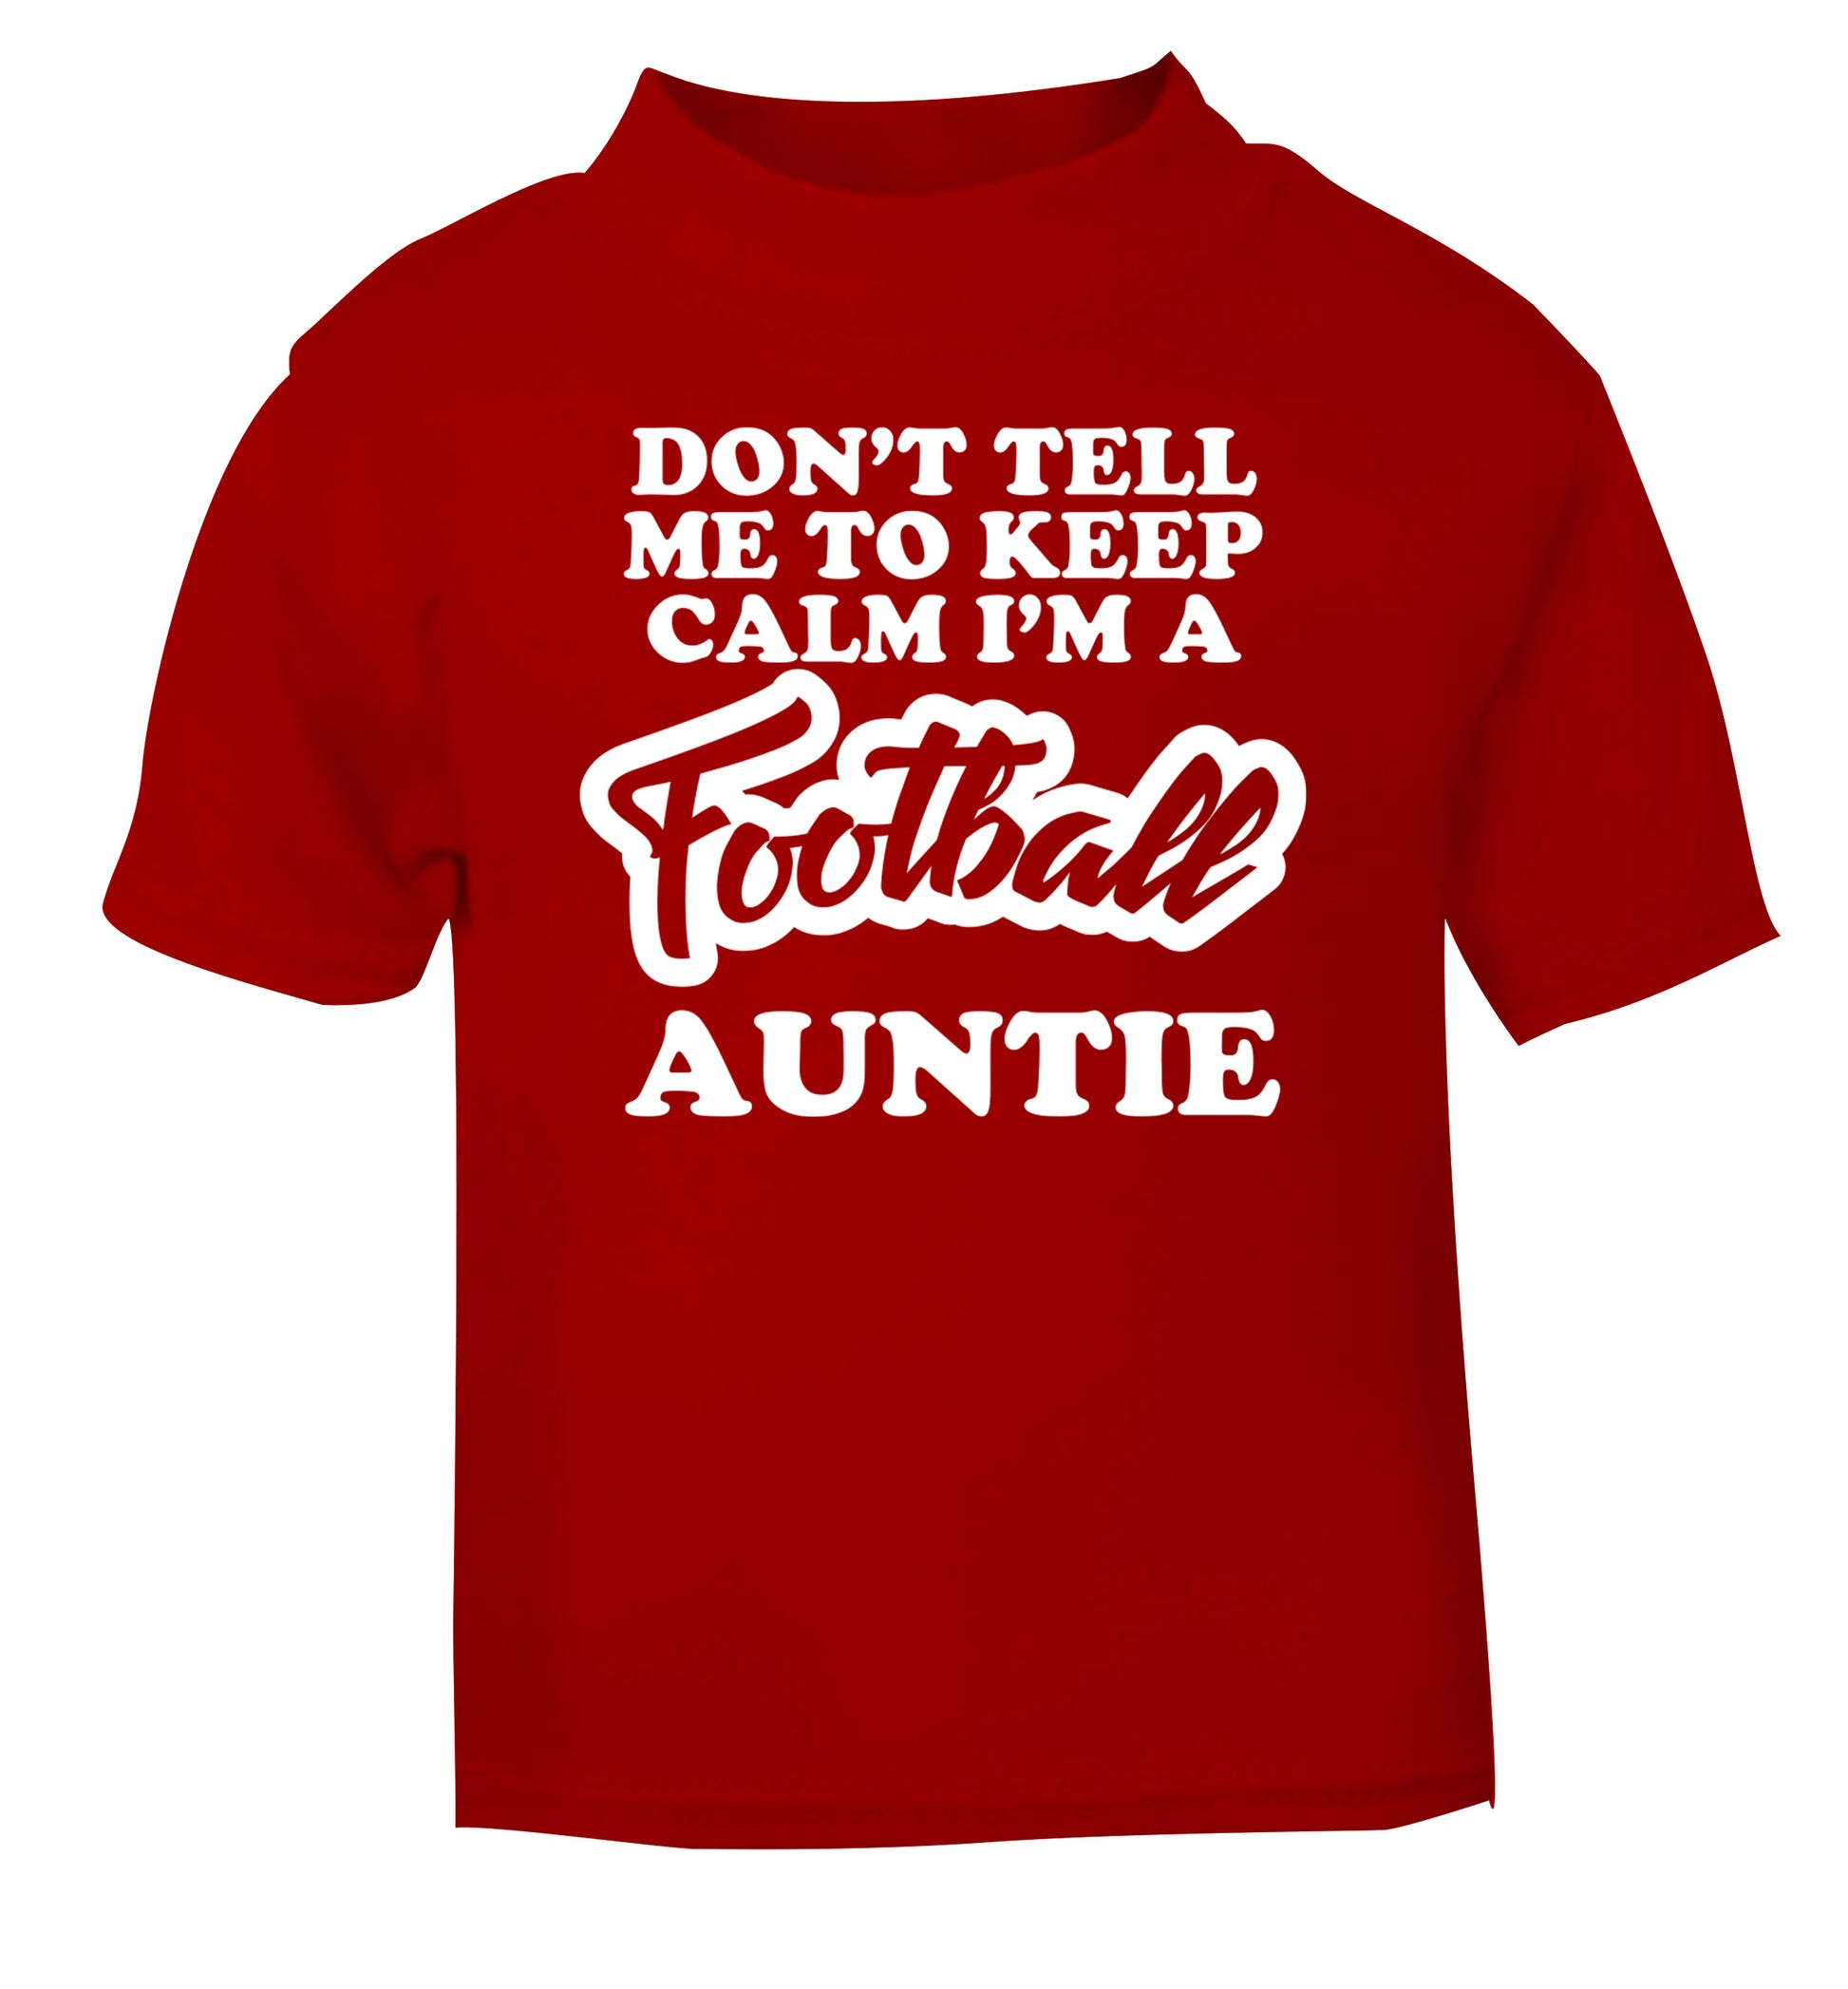 Don't tell me to keep calm I'm a football auntie red Baby Toddler Tshirt 2 Years